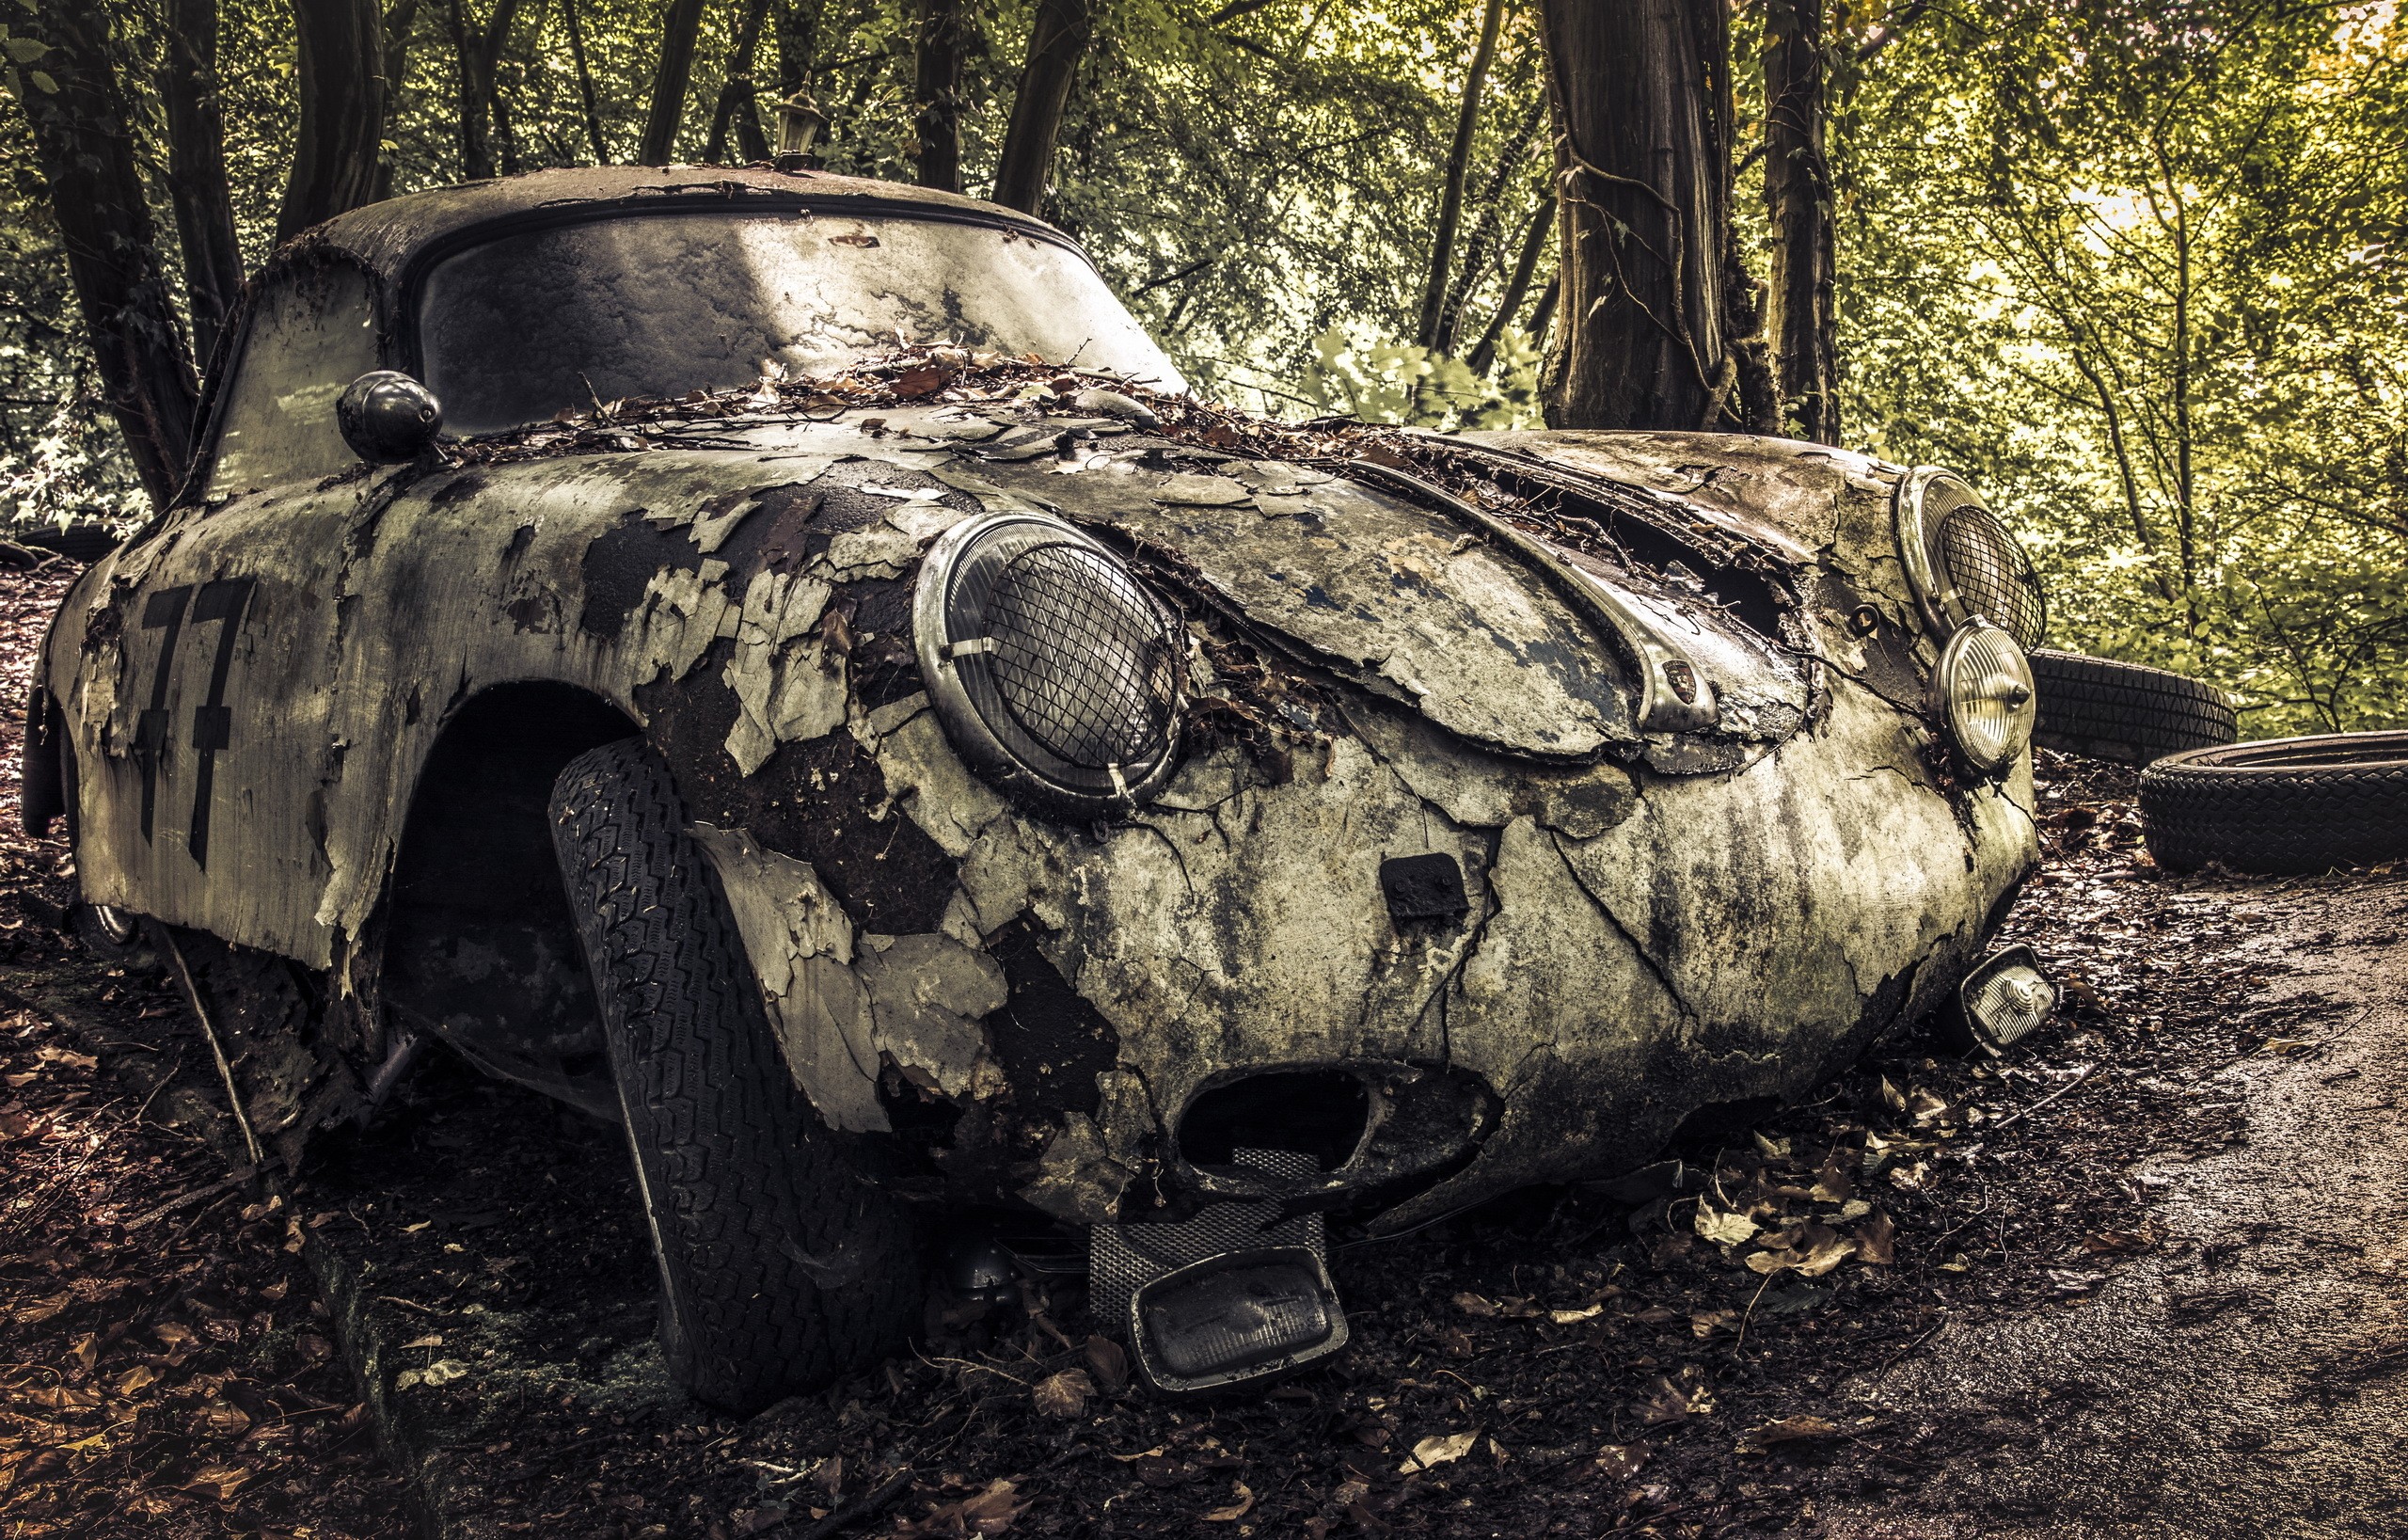 General 2560x1637 car vehicle wreck outdoors